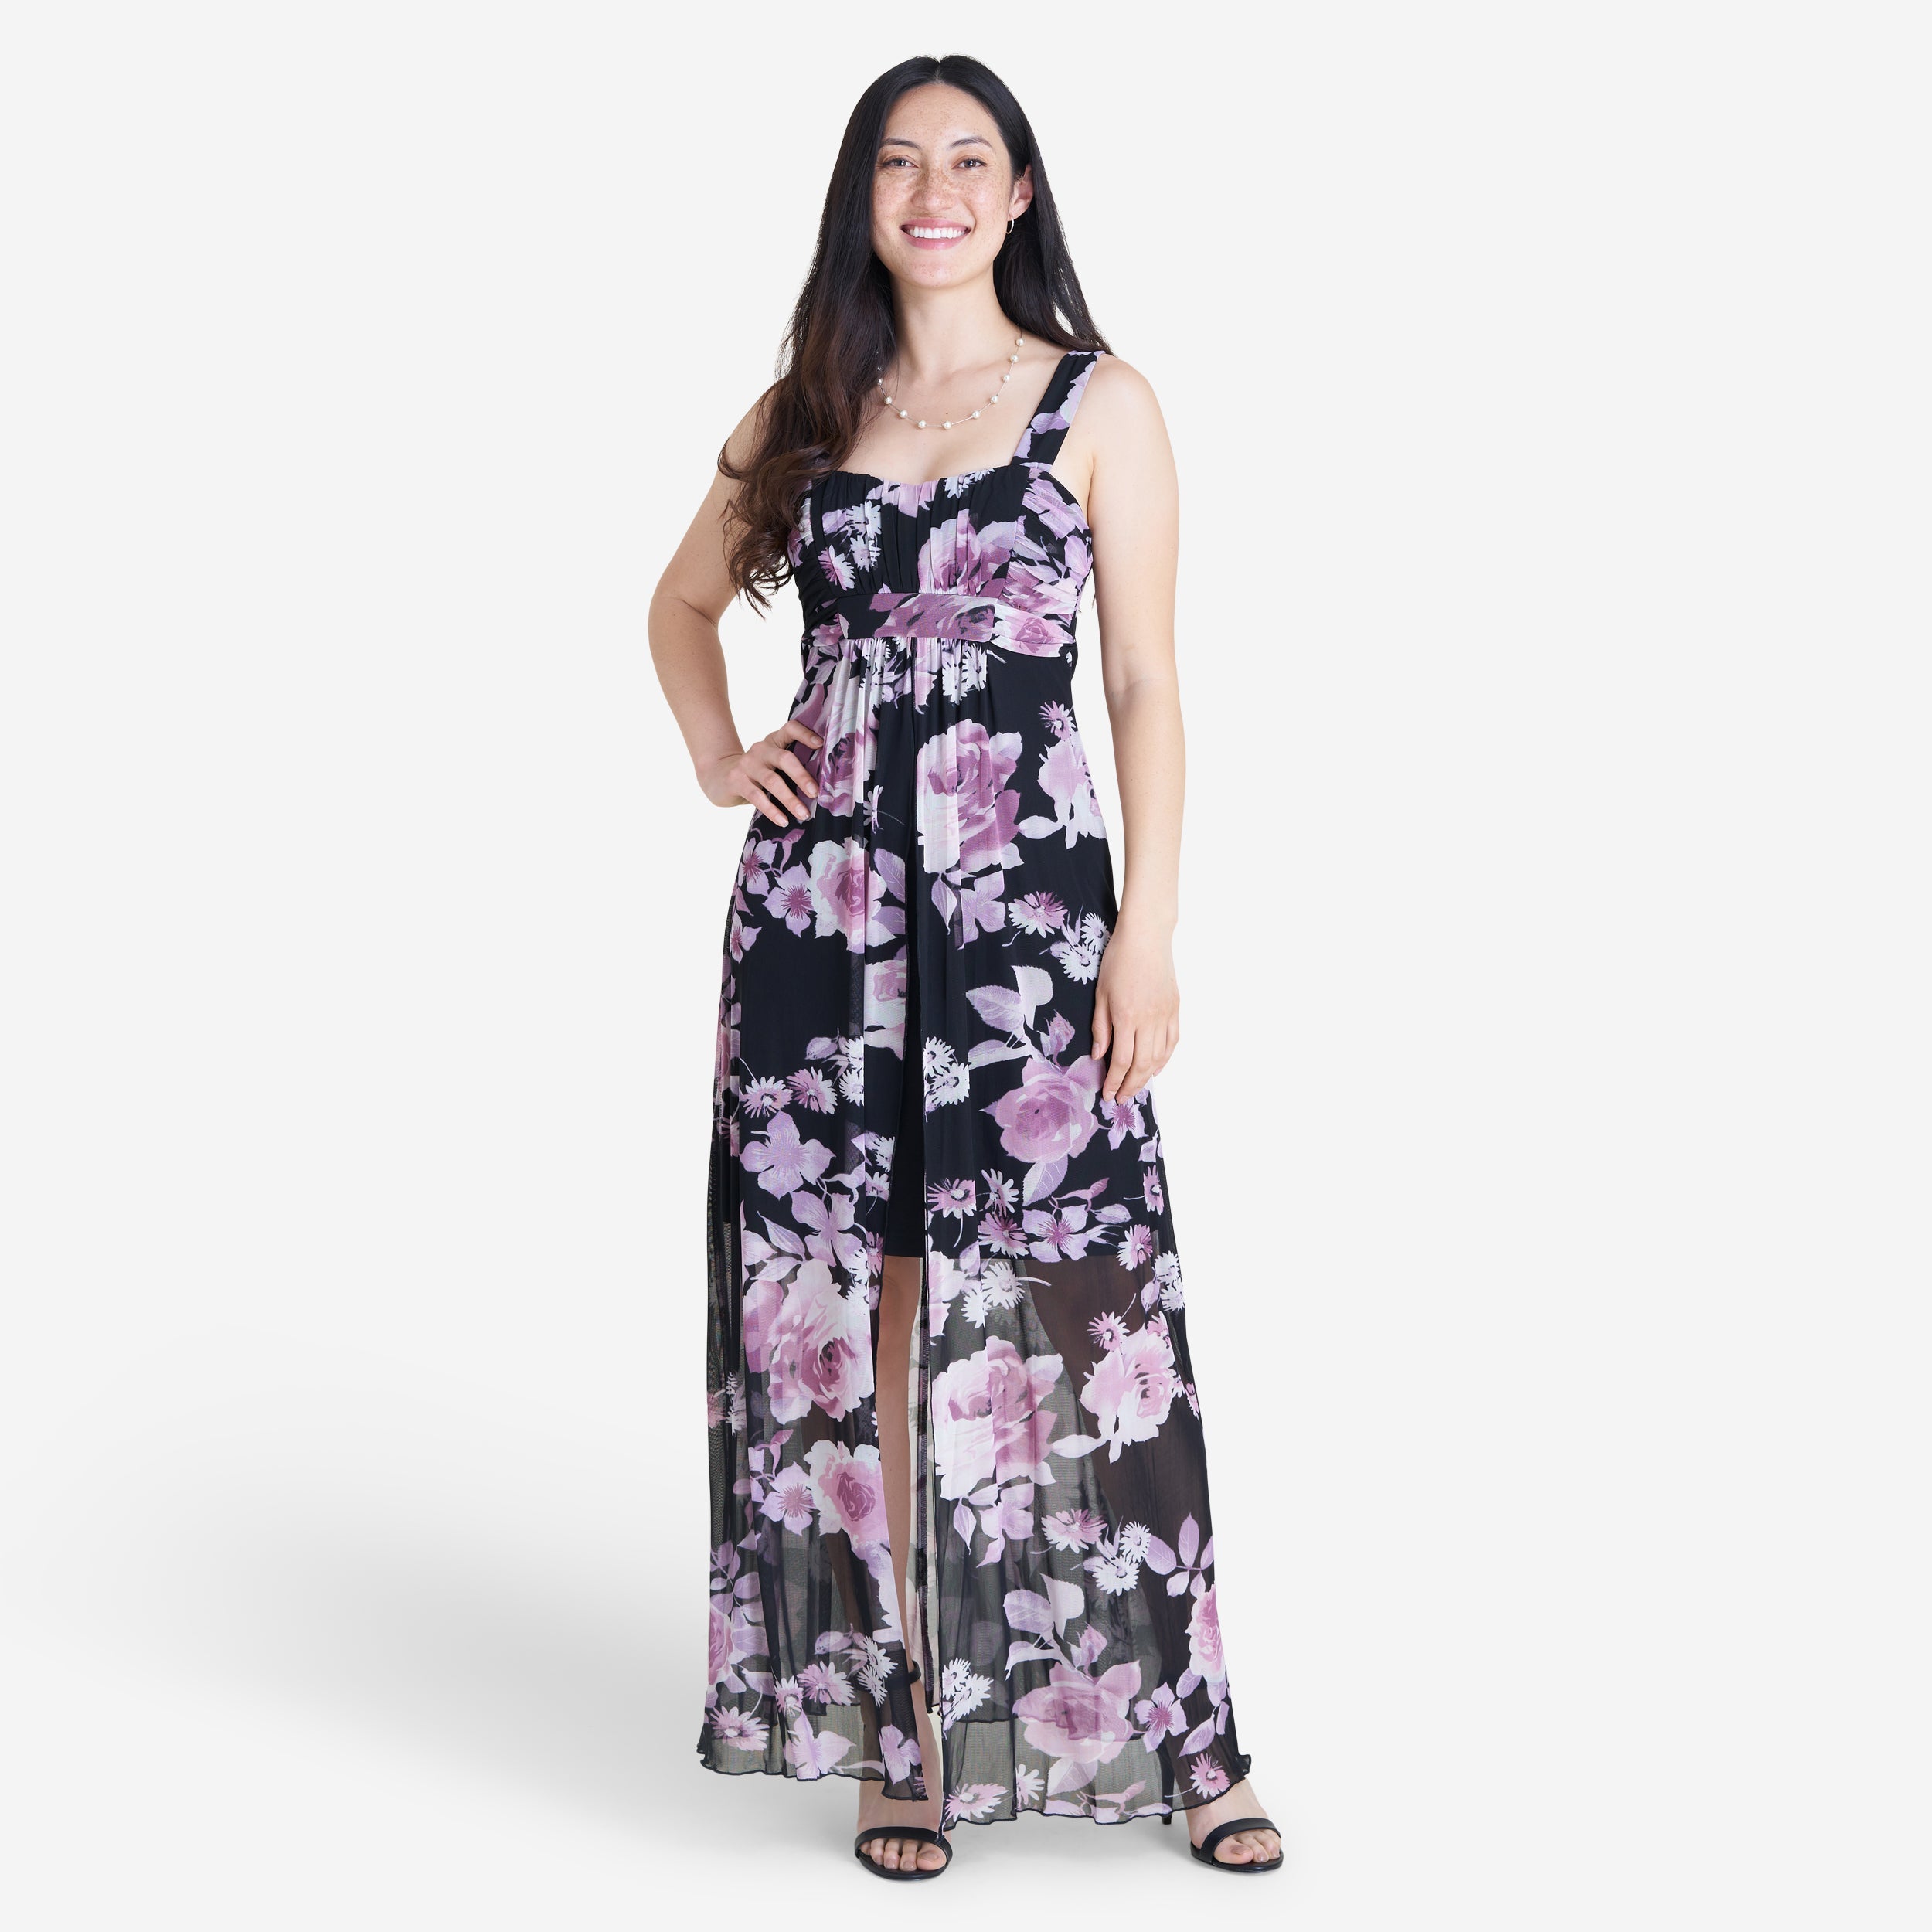 Woman posing wearing Dusty Mauve Marilyn Dusty Mauve Floral Mesh Maxi Dress from Connected Apparel